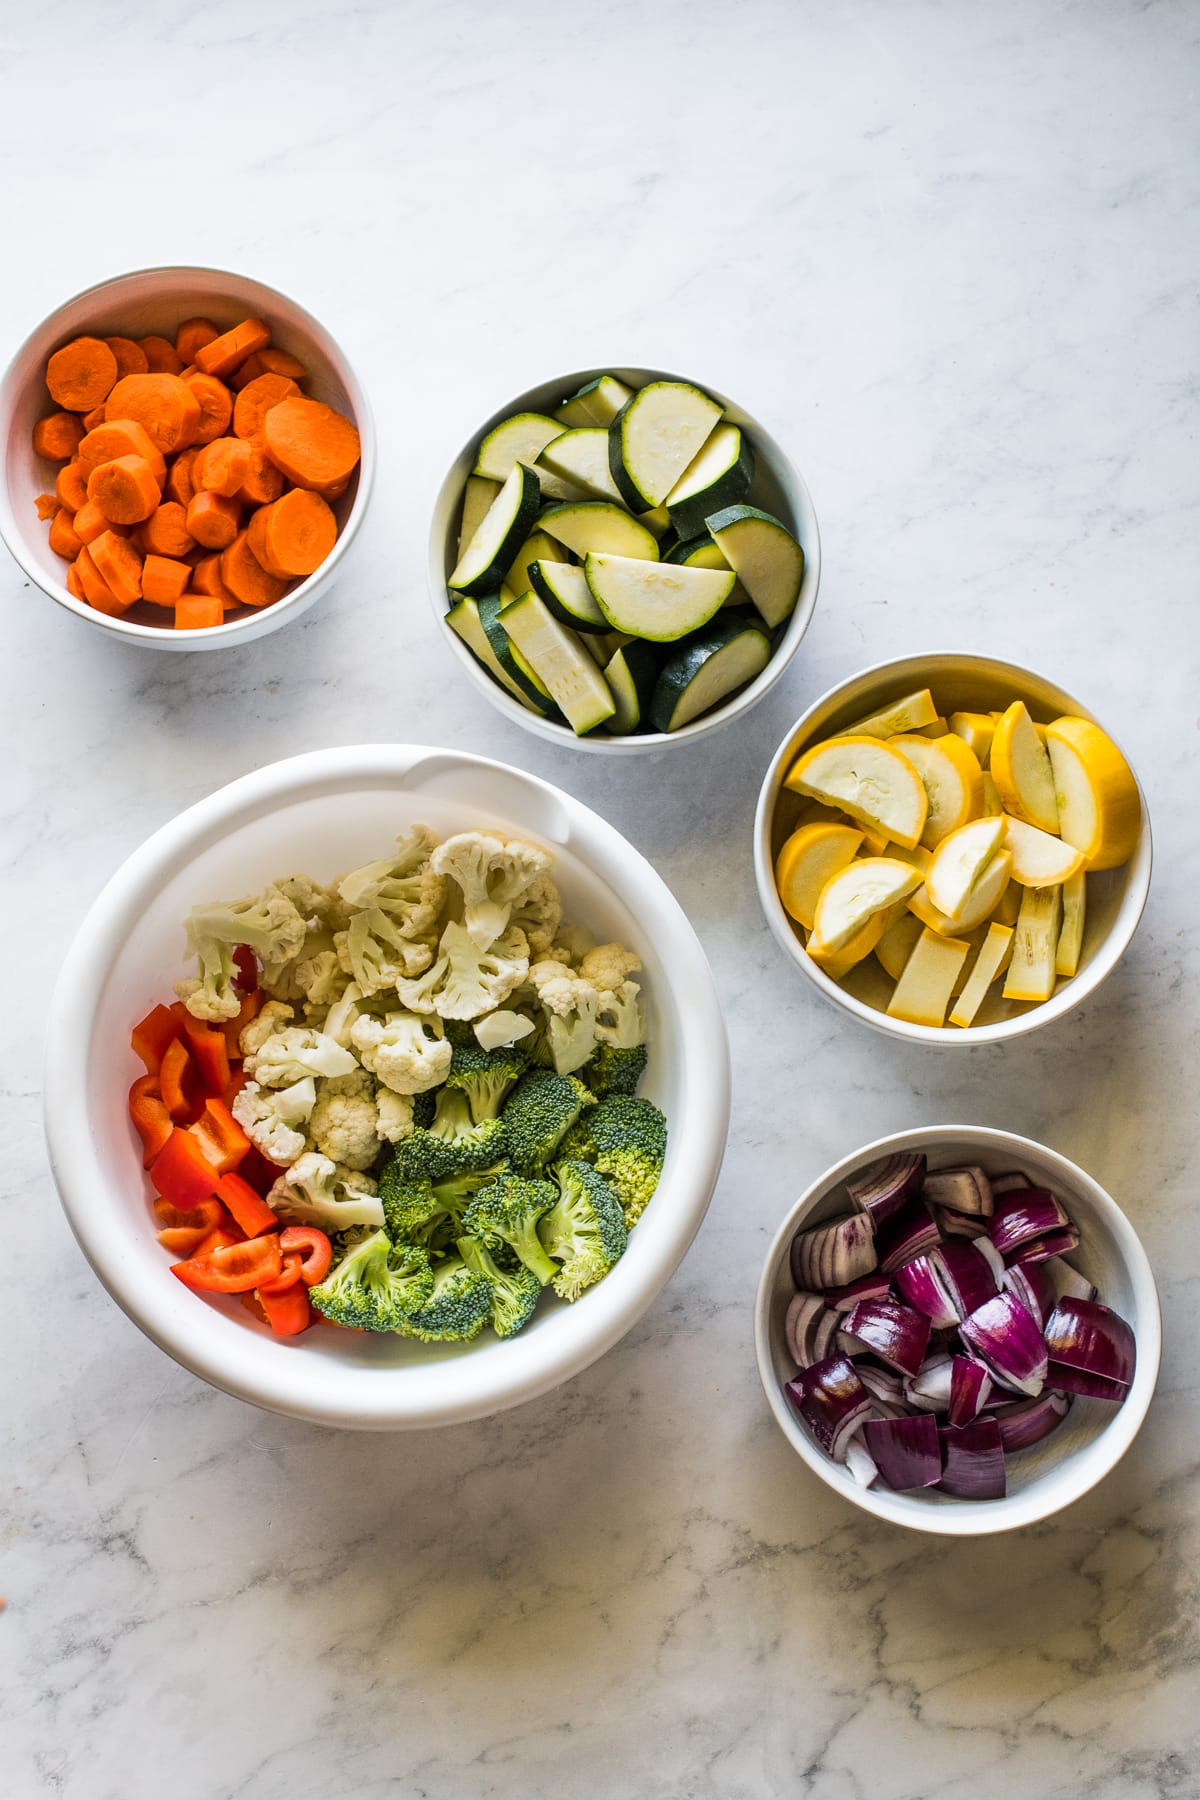 Diced vegetables in bowls ready to be roasted.